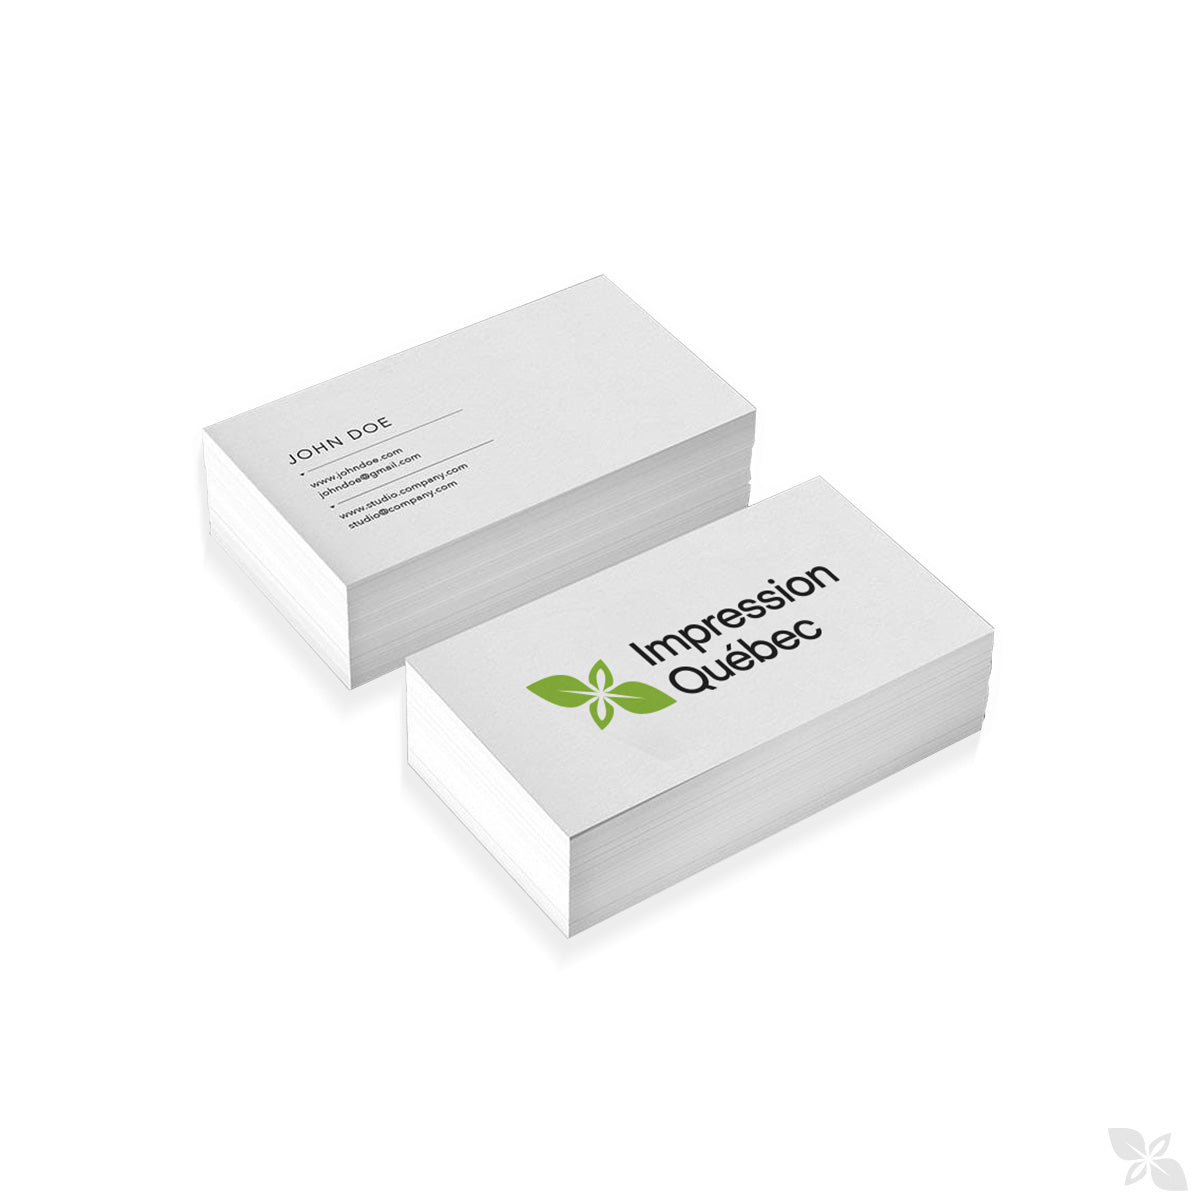 100% recycled business cards